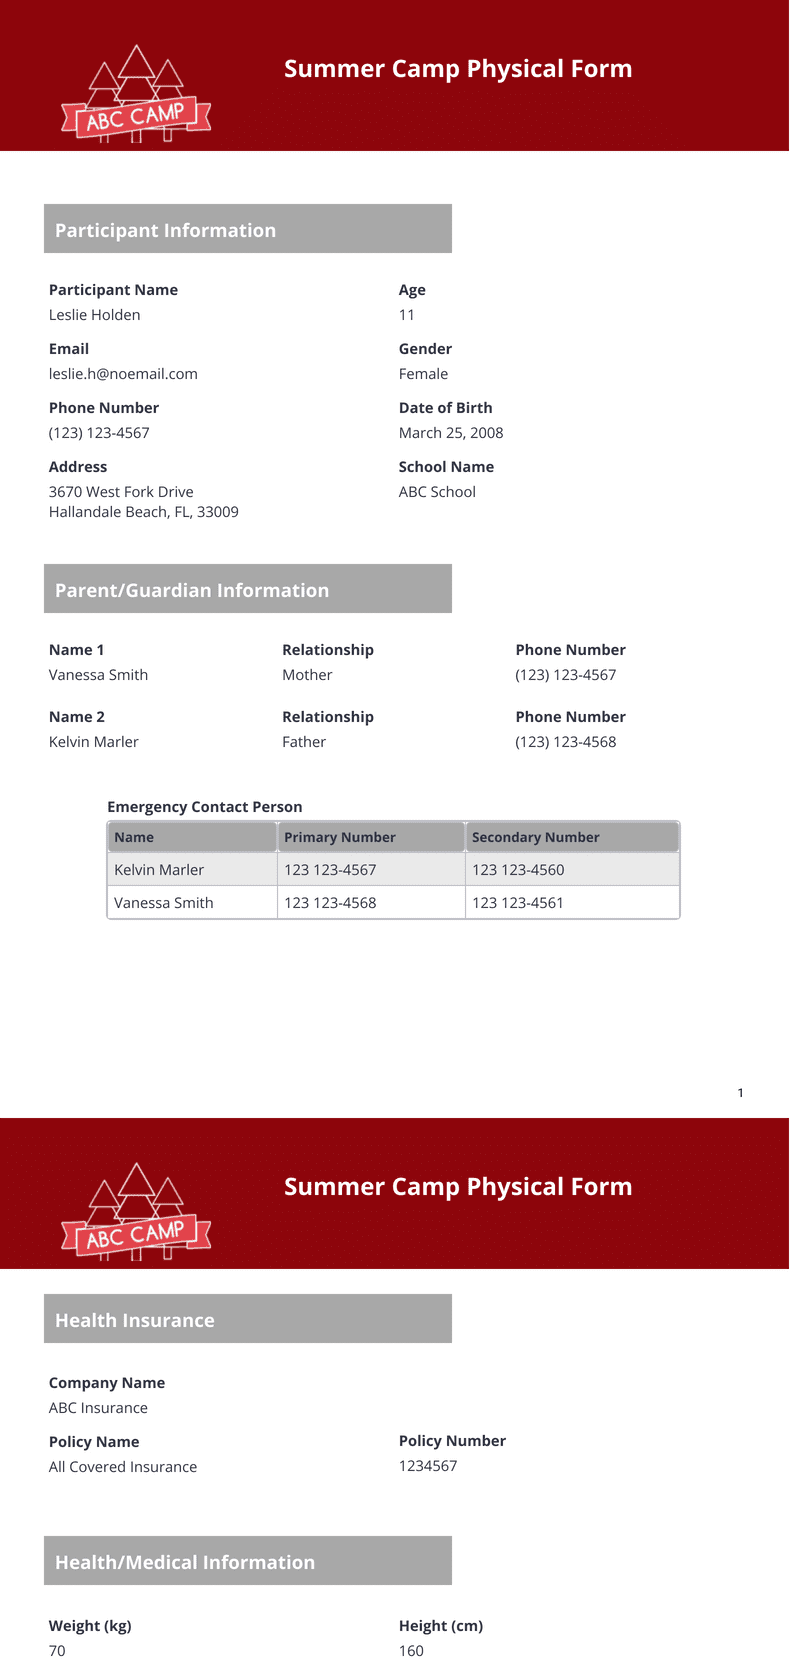 PDF Templates: Summer Camp Physical Form